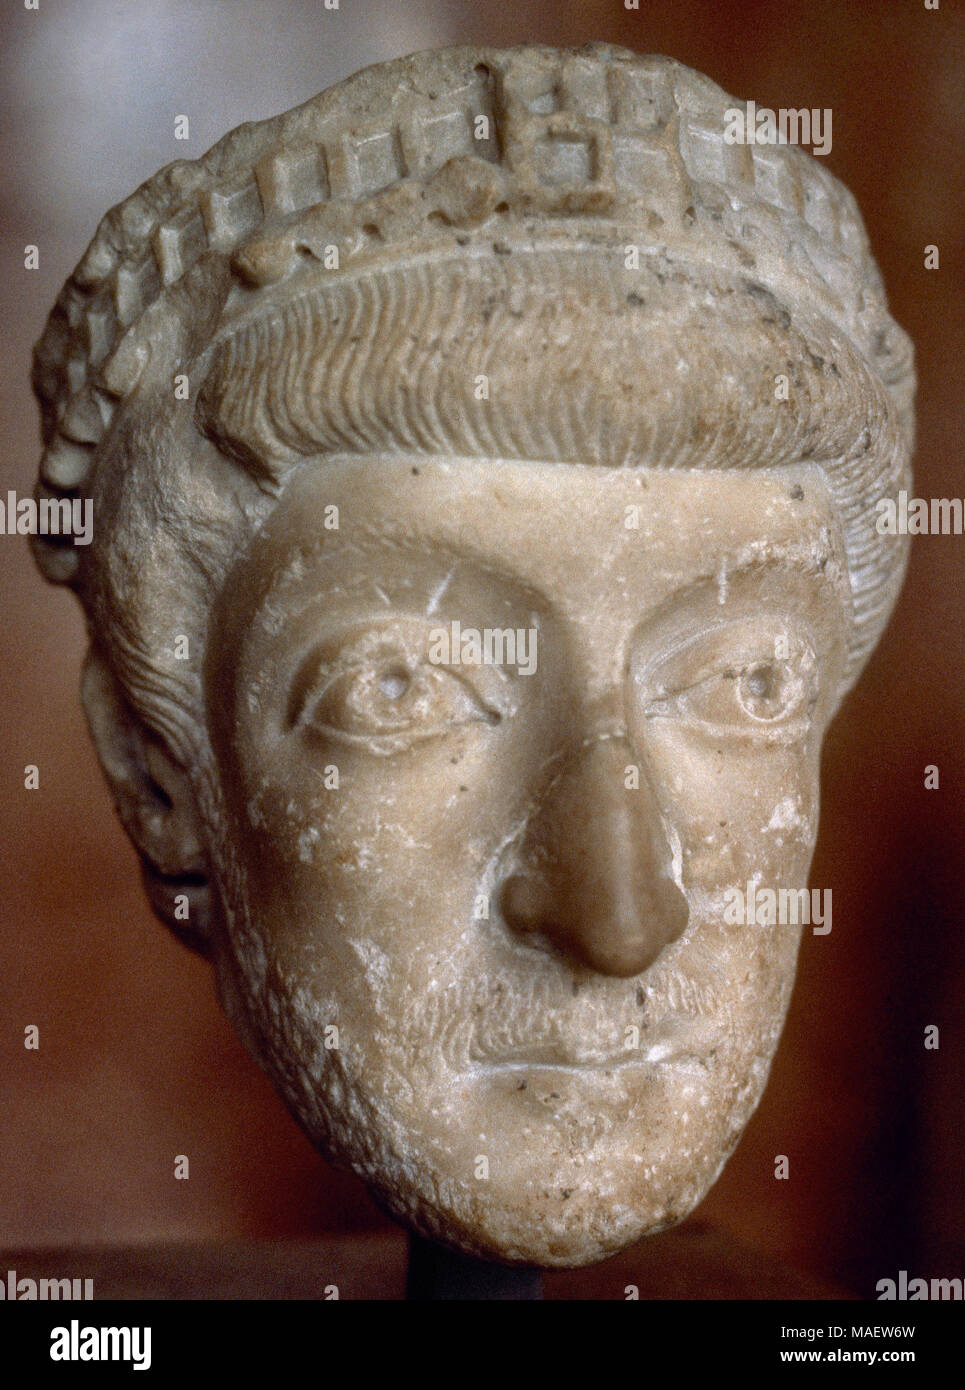 Theodosius II (401-450). Eastern Roman Emperor from 408 to 450. Bust. Marble, ca. 440 d.C. Louvre Museum, Paris, France. Stock Photo